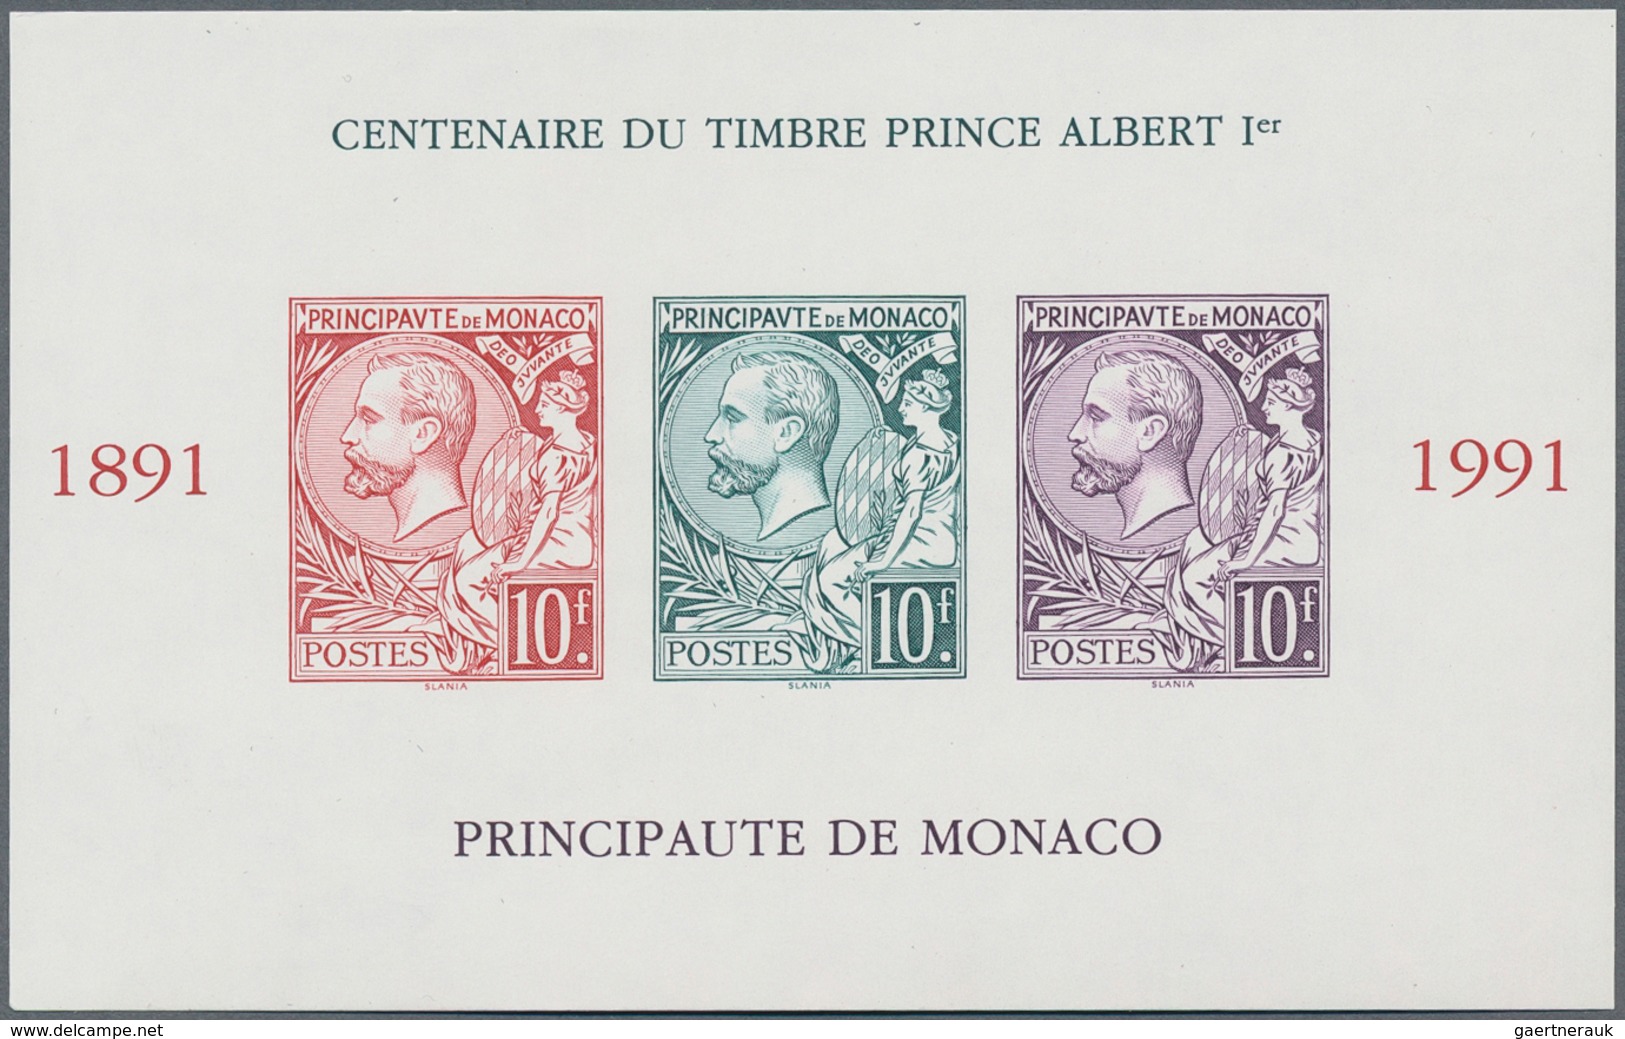 Monaco: 1991, Stamp Centenary, Souvenir Sheet IMPERFORATE, 50 Pieces Unmounted Mint. Maury 1820A Nd - Used Stamps